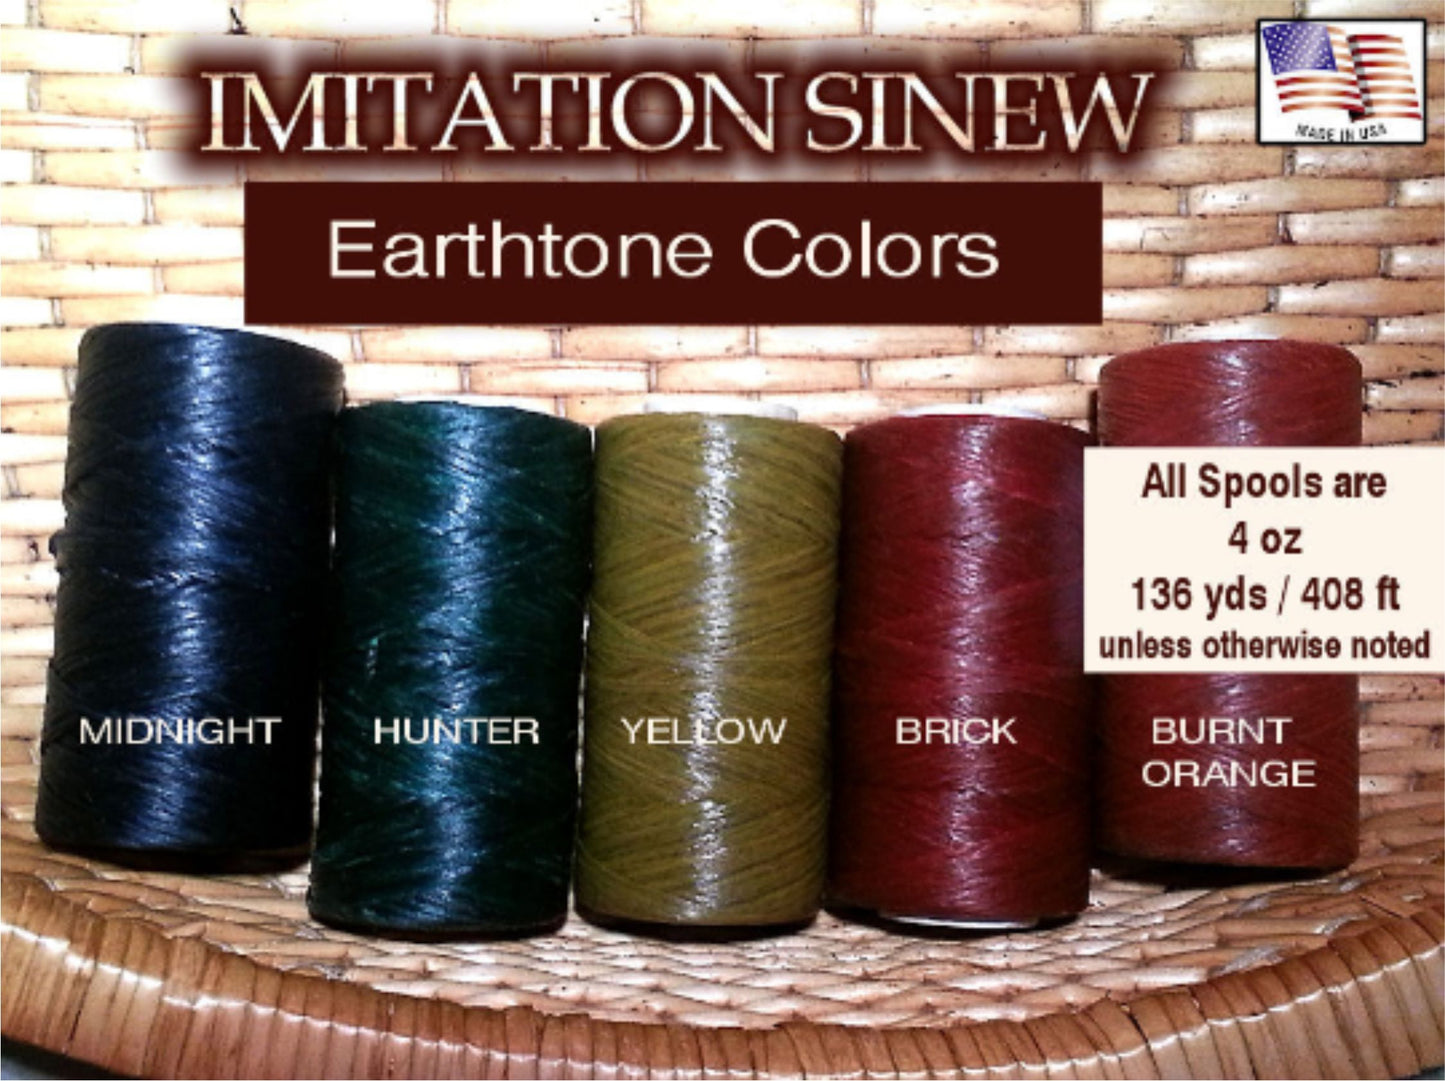 Imitation / Artificial SINEW 4 oz Spool, for Pine Needle Basketry, Leather Craft, Gourd Art, Dreamcatchers